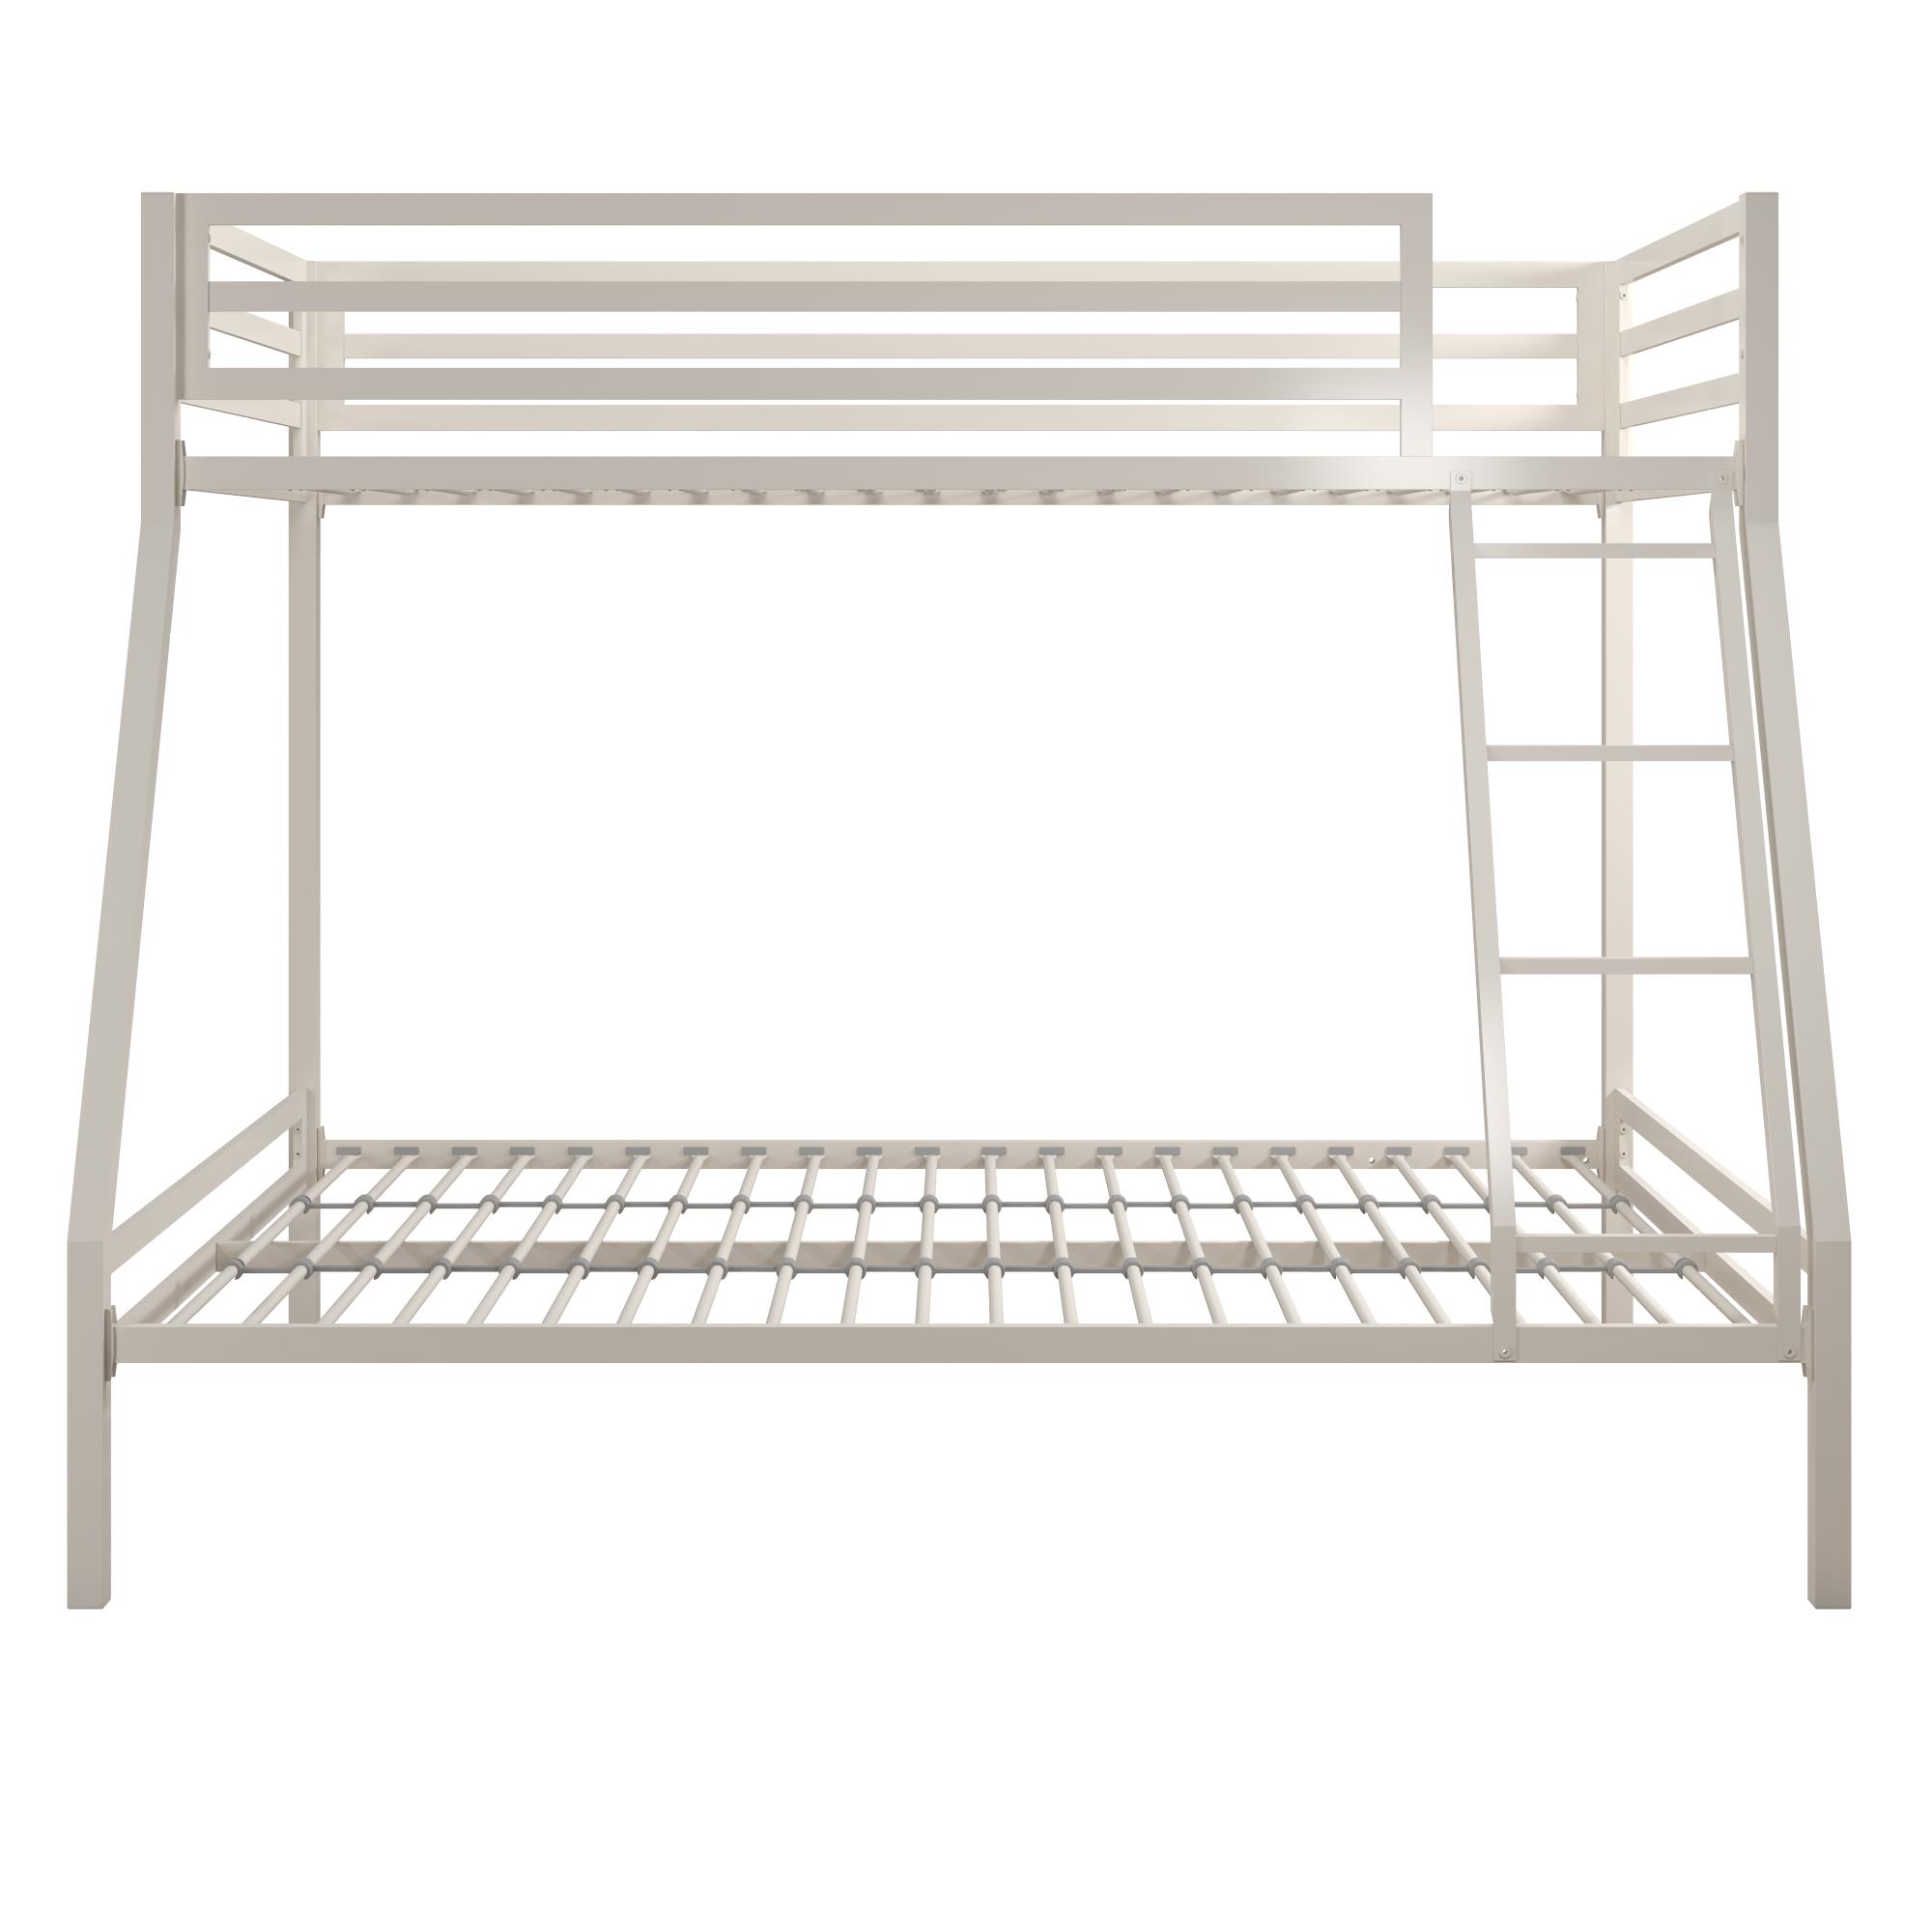 Mainstays Premium Twin over Full Metal Bunk Bed, Off White - image 11 of 13